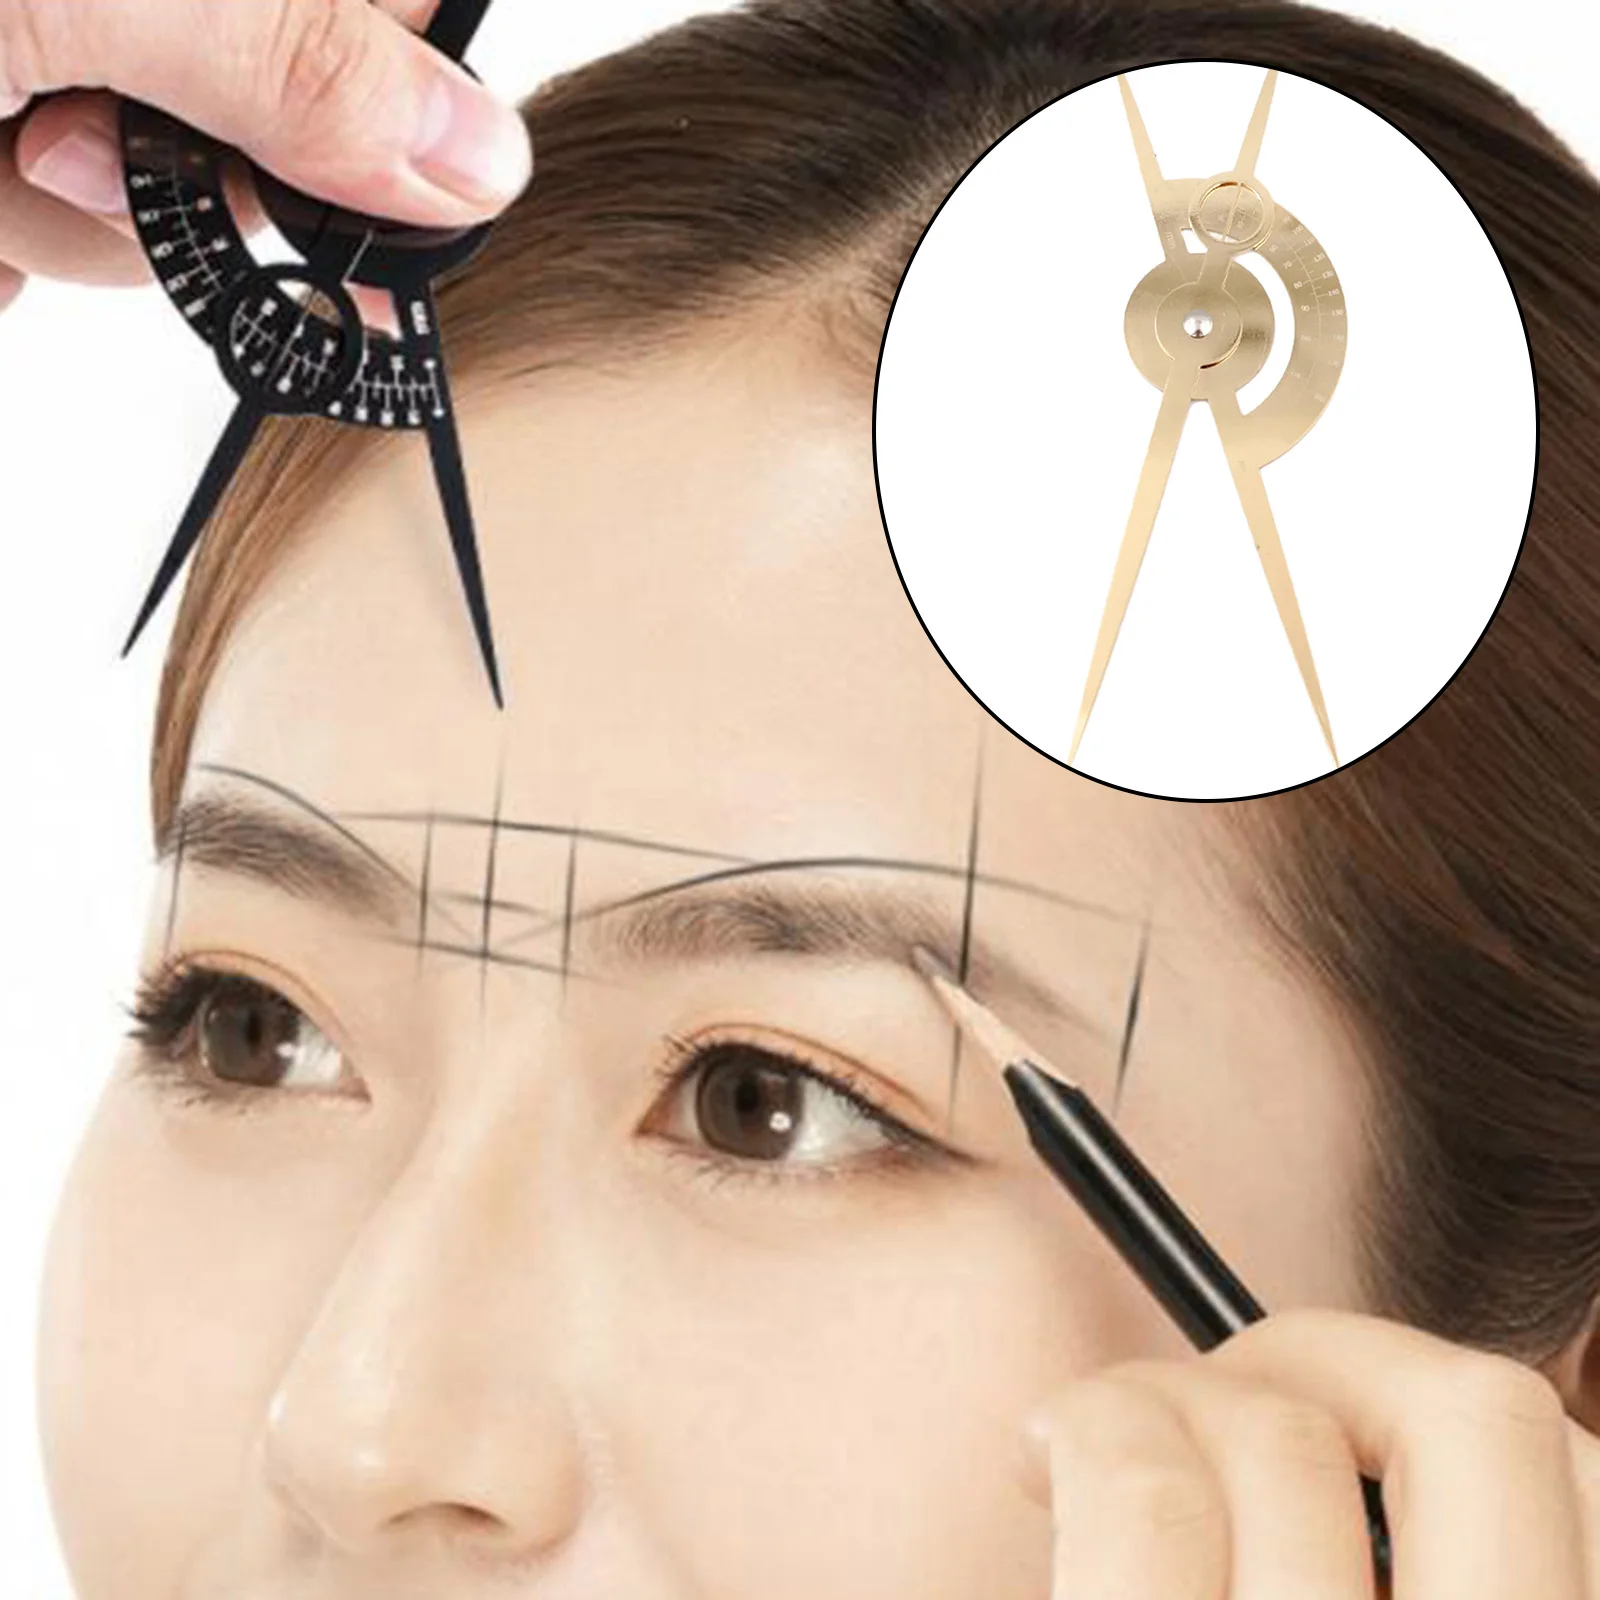 Accurate Ratio Caliper Professional Eyebrow Removable Reusable Ruler 3-Point Positioning for Makeup DIY Shaping Tools